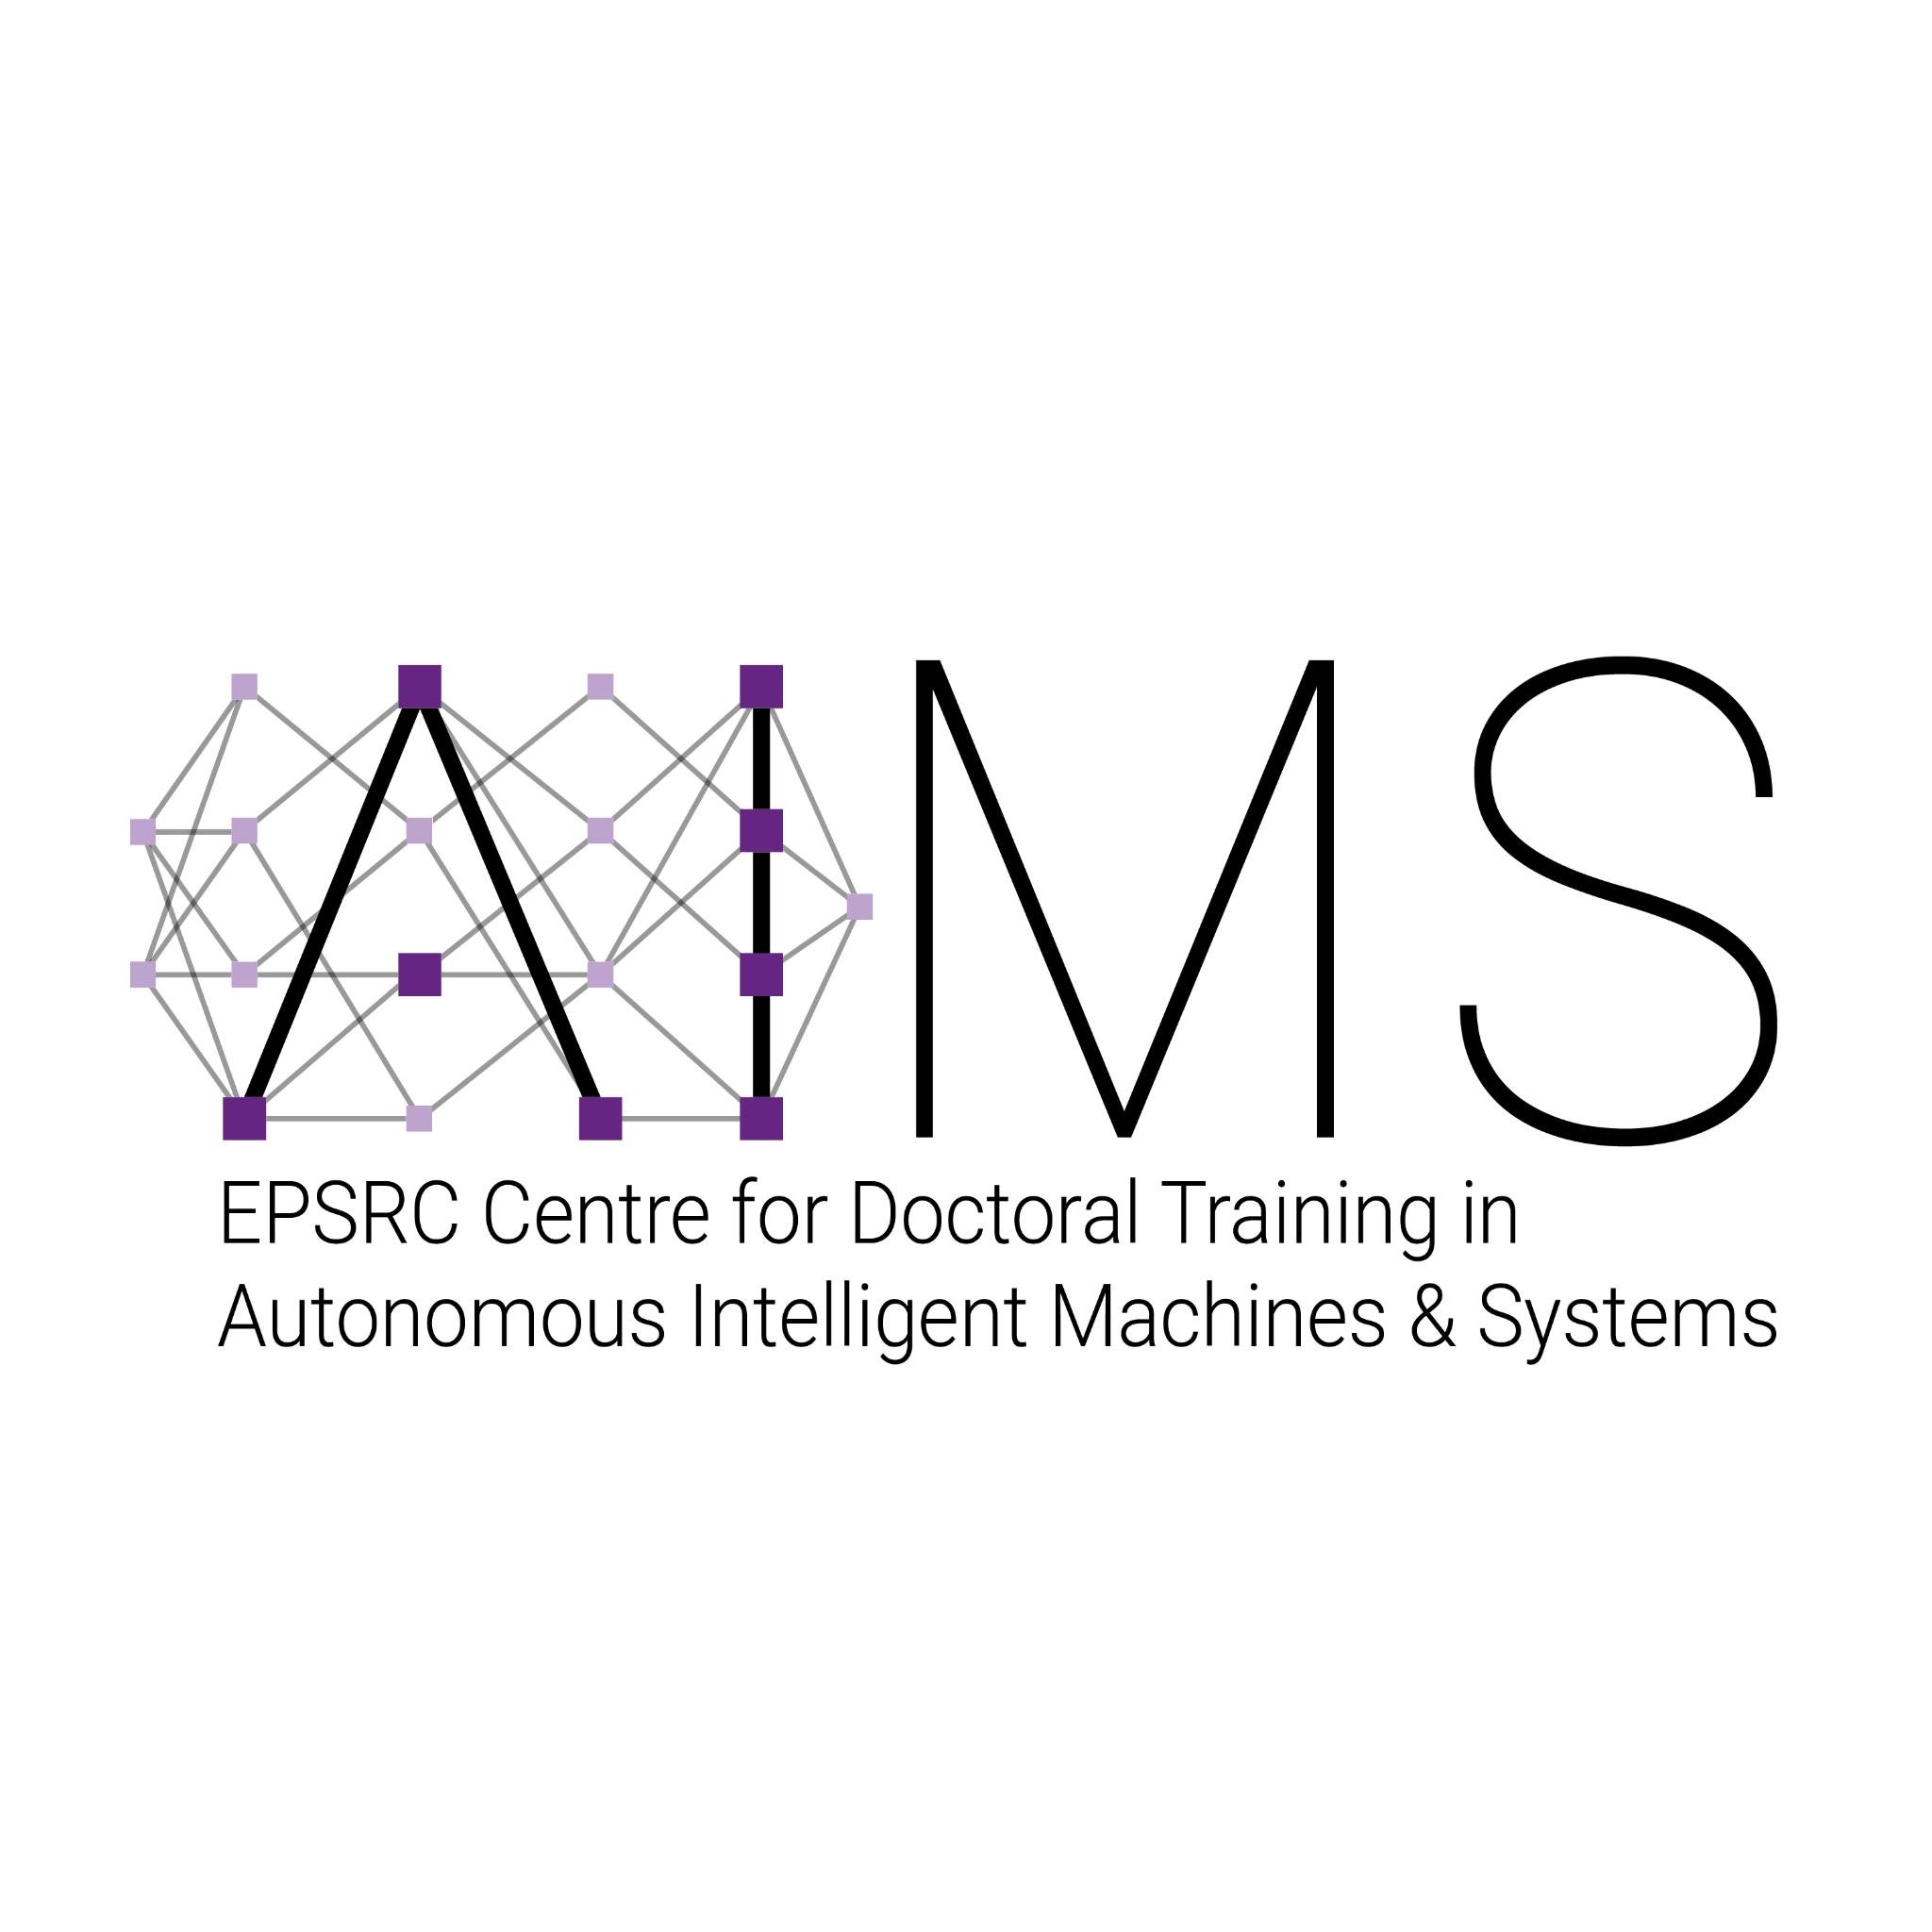 EPSRC Centre for Doctoral Training in Autonomous Intelligent Machines & Systems (AIMS) at @UniofOxford. Joint between @CompSciOxford and @oxengsci